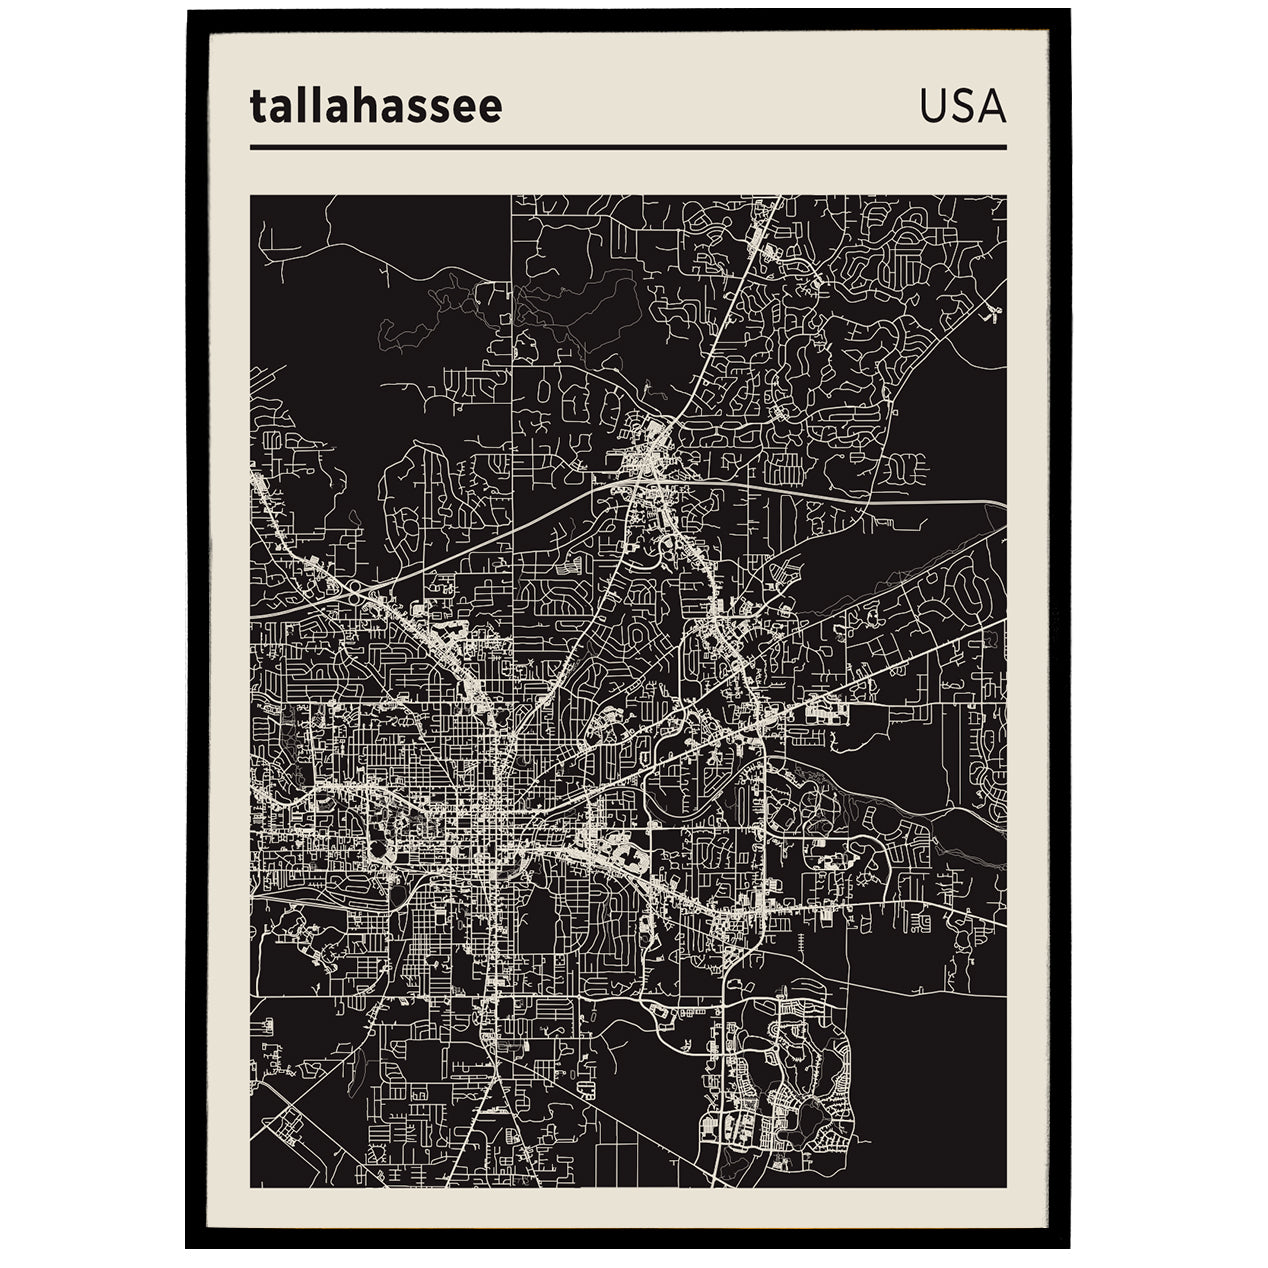 Tallahassee, Florida - USA | City Map Poster - Black and White